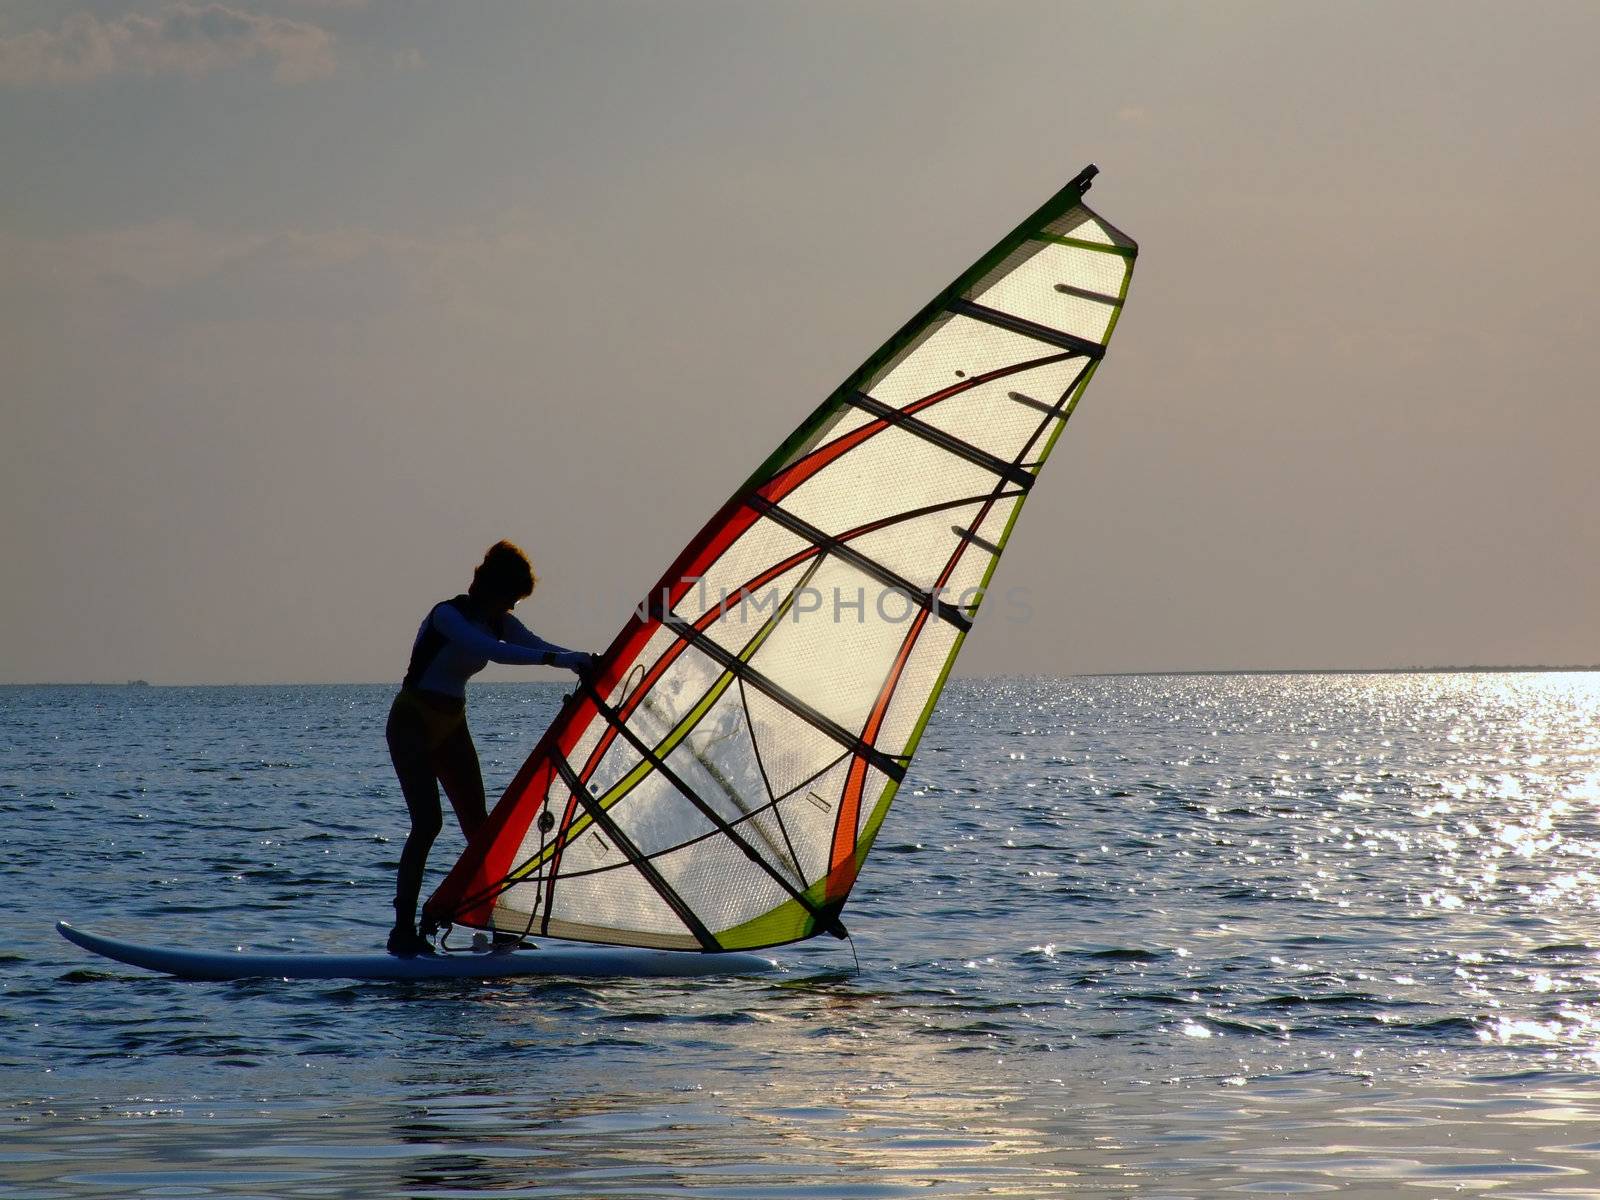 A women is learning windsurfing at the sunset 2